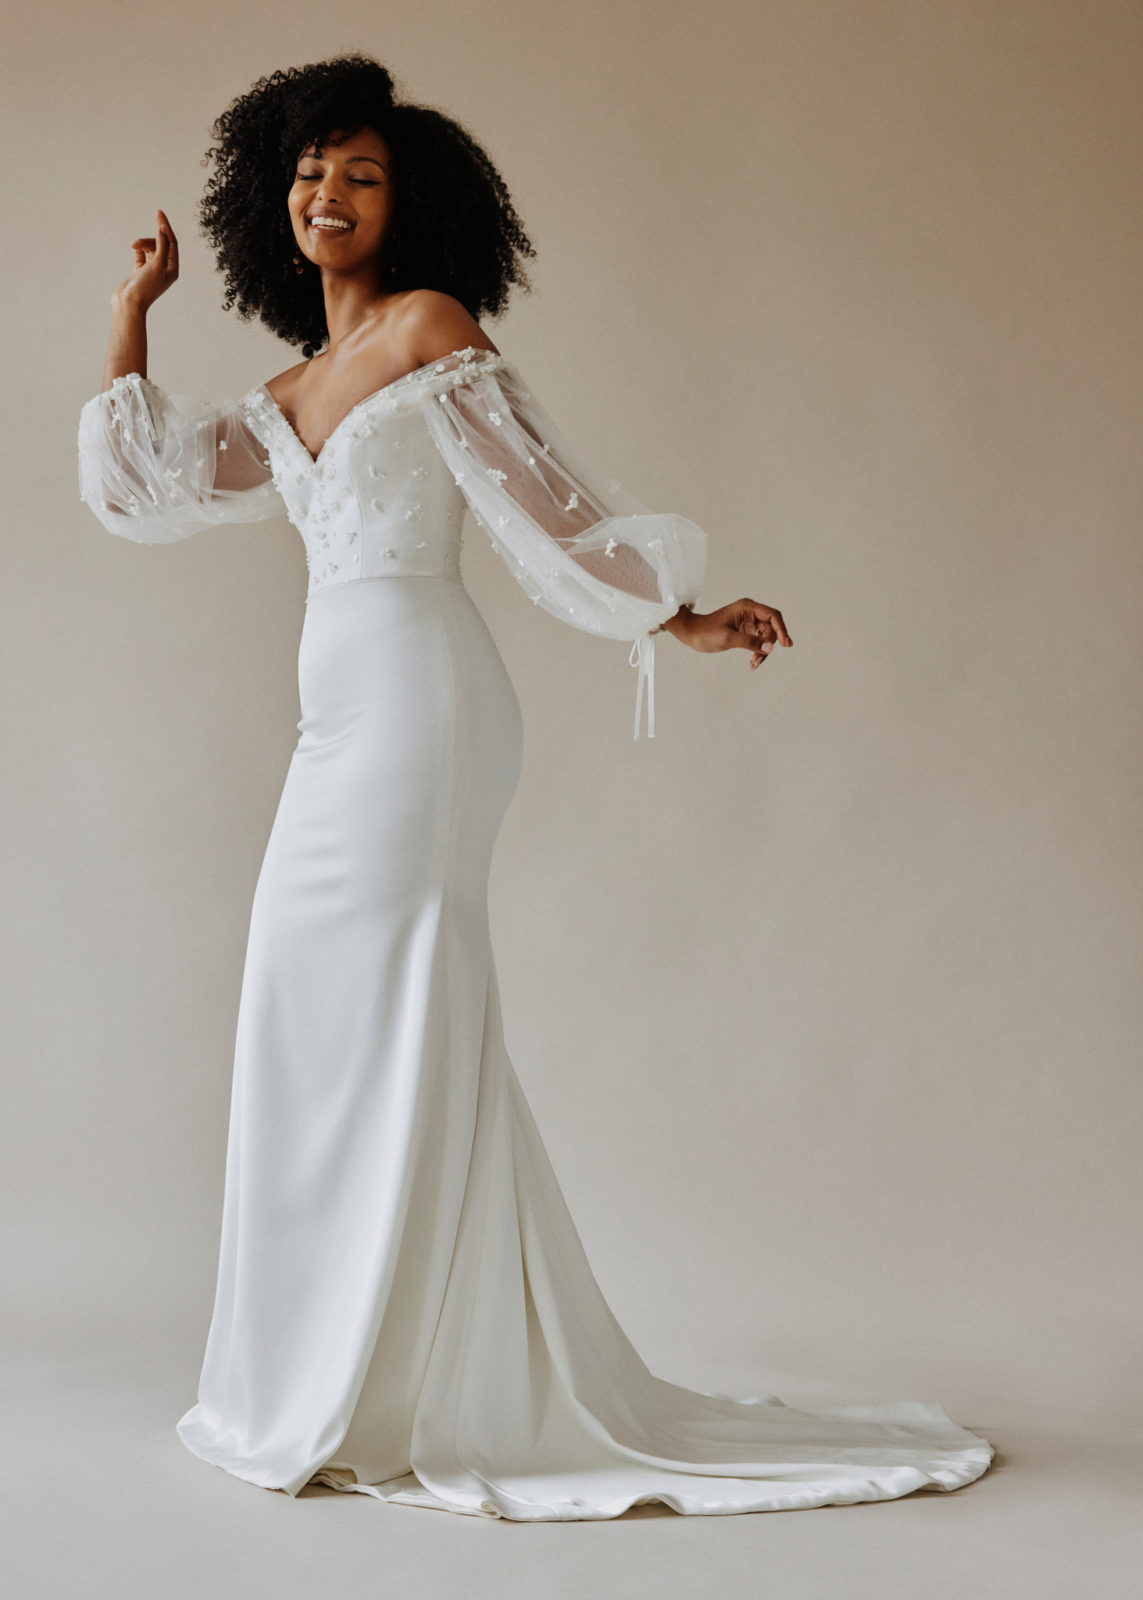 Chic bridal style for 2022 weddings